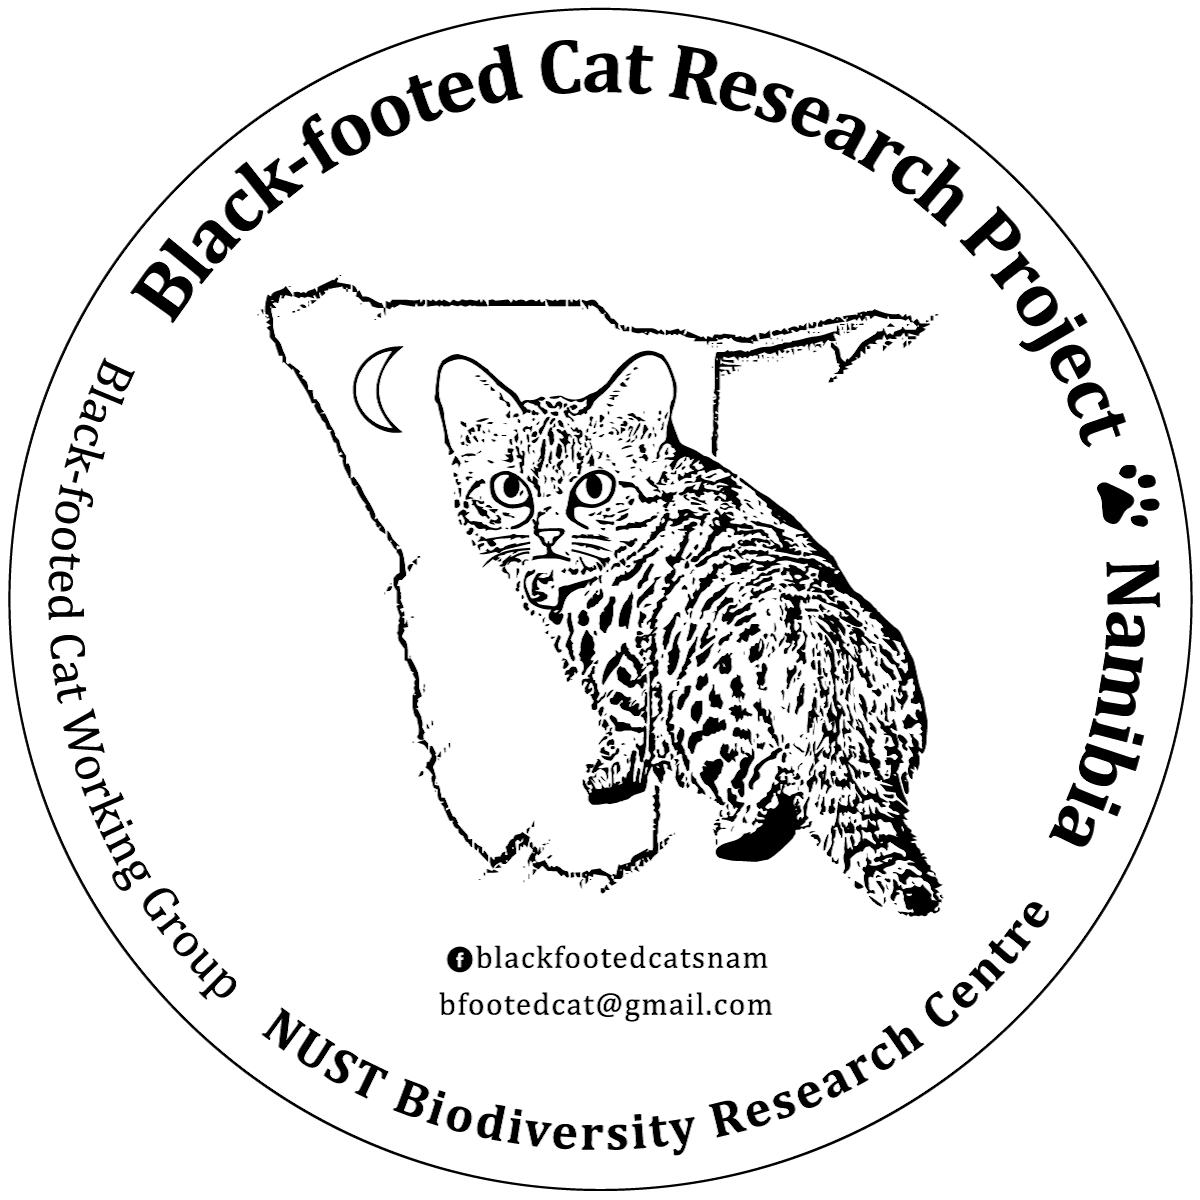 Black-footed cat research project Namibia logo.